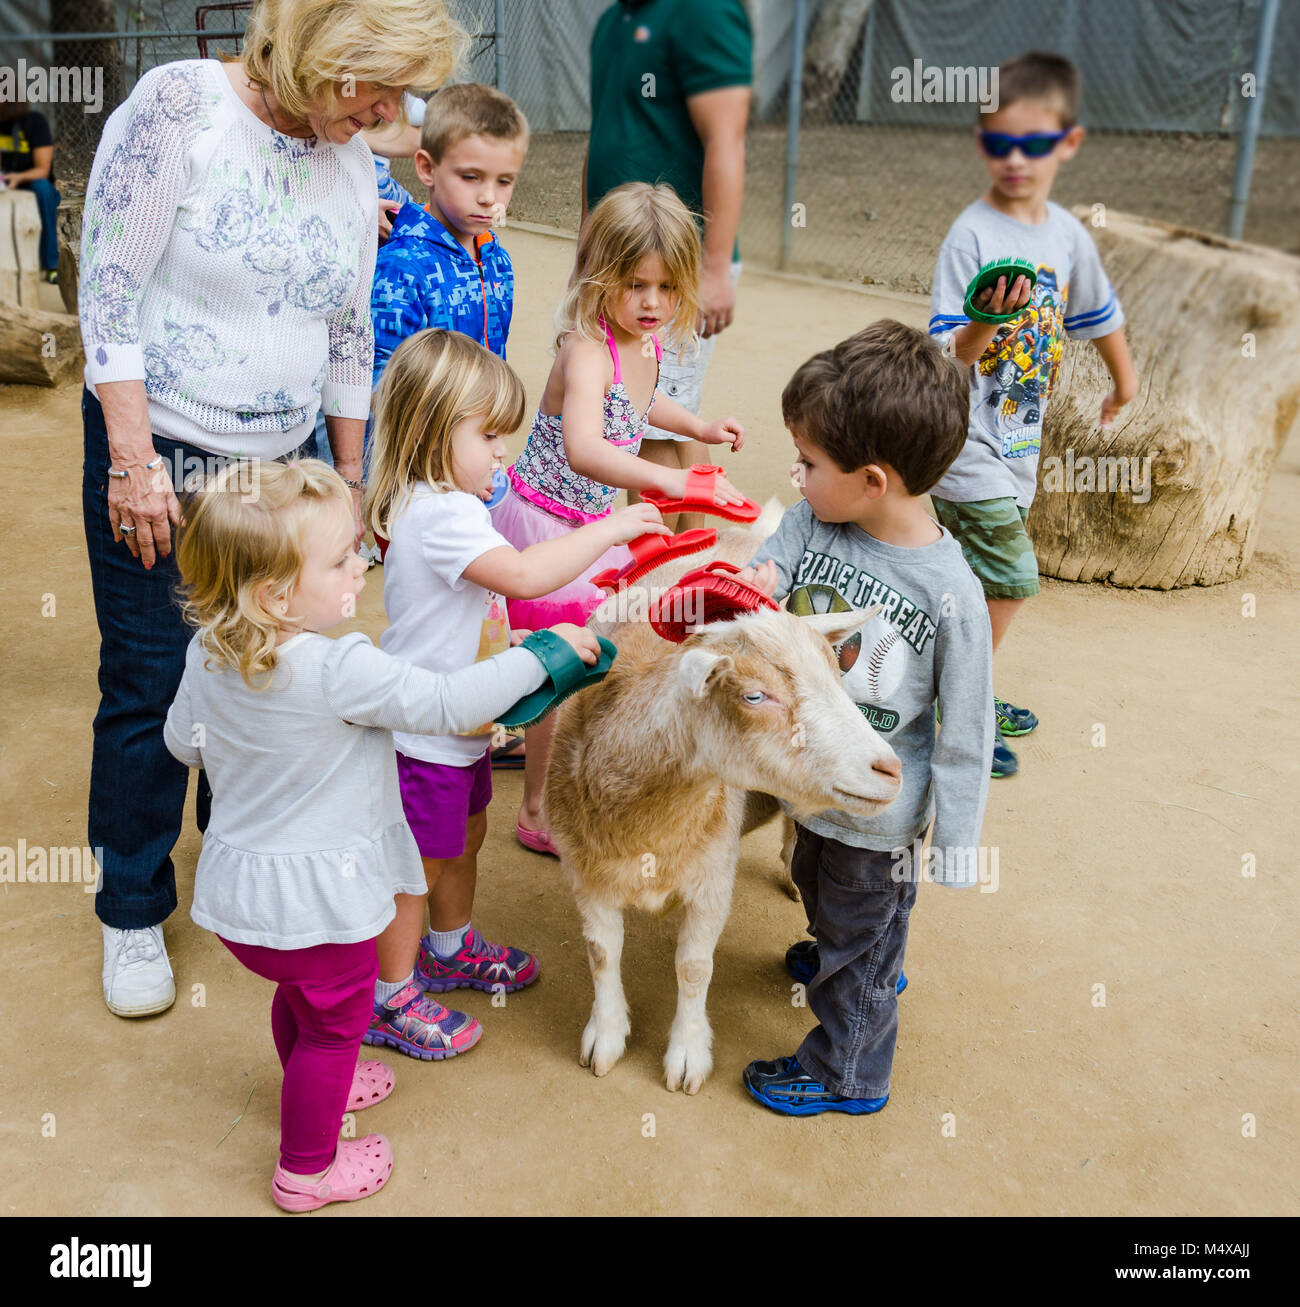 Children brush a goat in the petting zoo at the Orange County Zoo in Orange, CA. Stock Photo